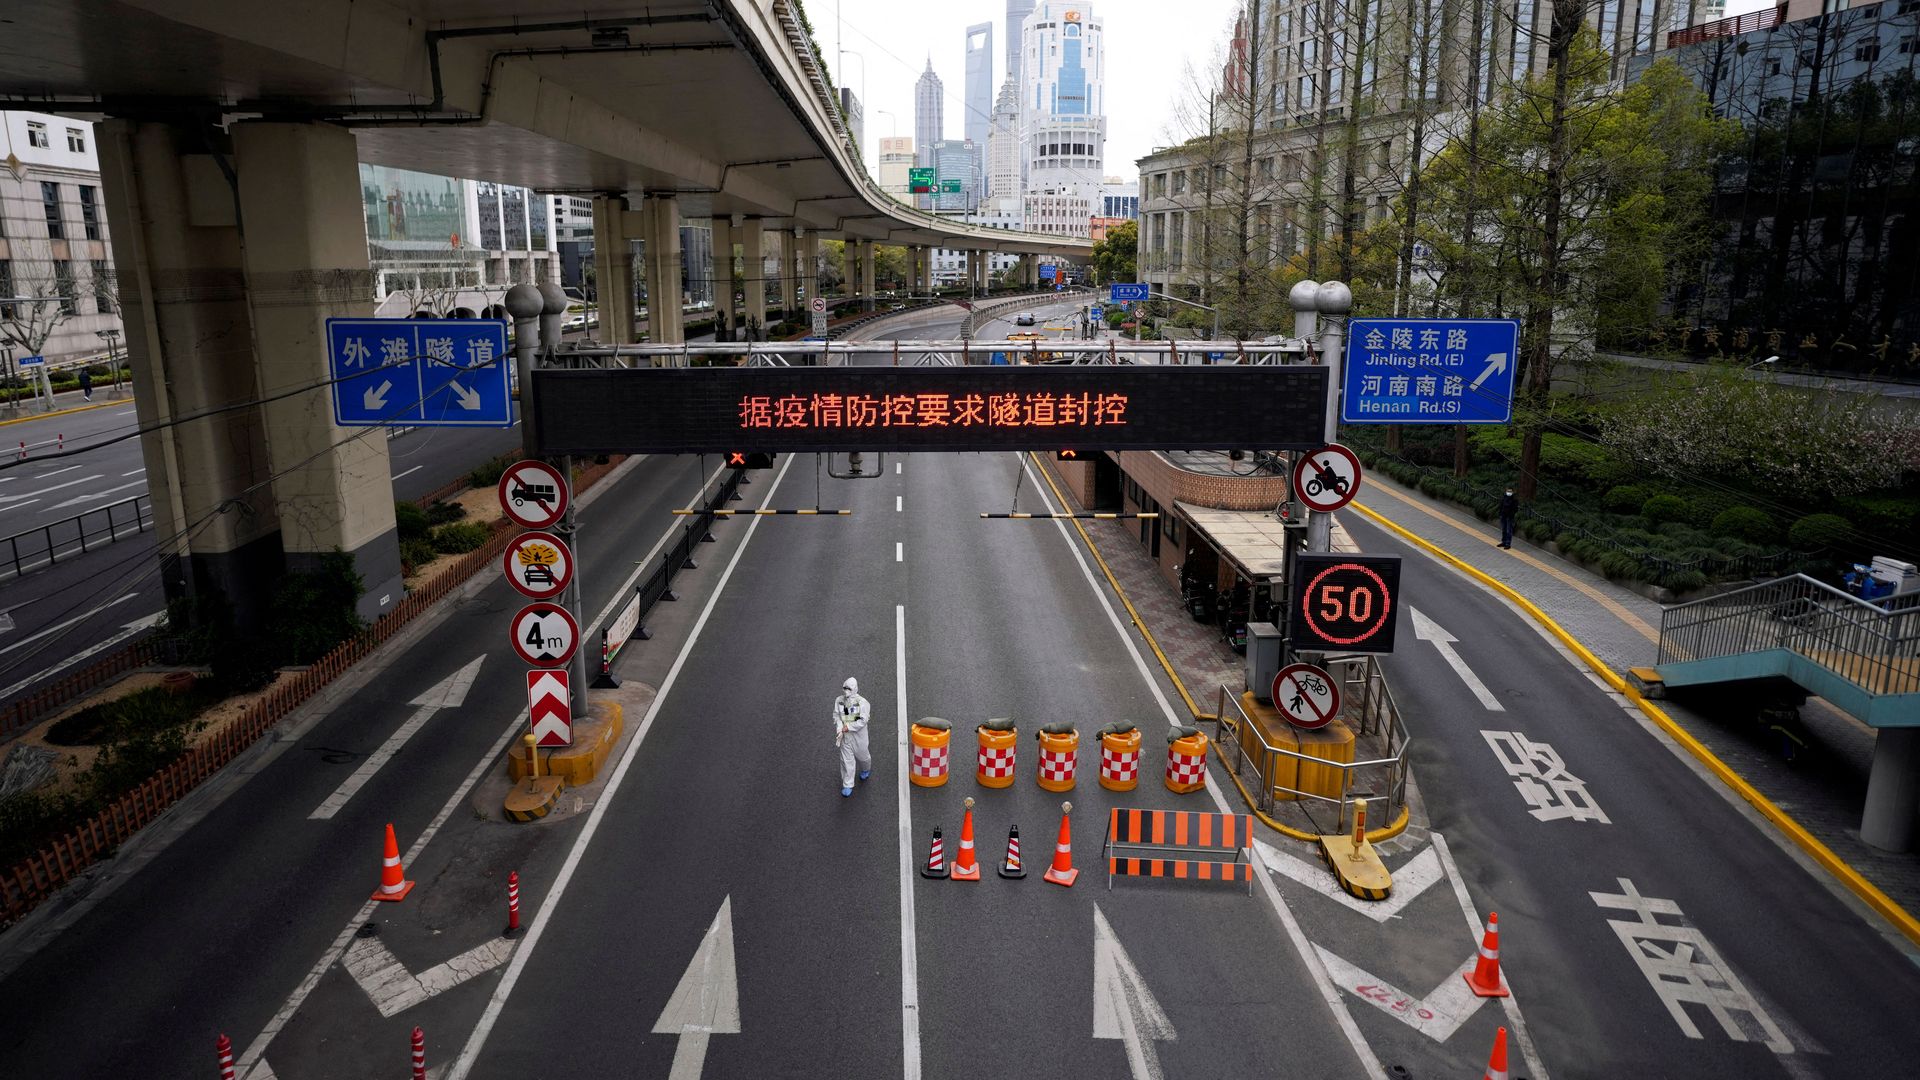 A worker in a protective suit walks today at the entrance to a tunnel leading to Shanghai's Pudong area.